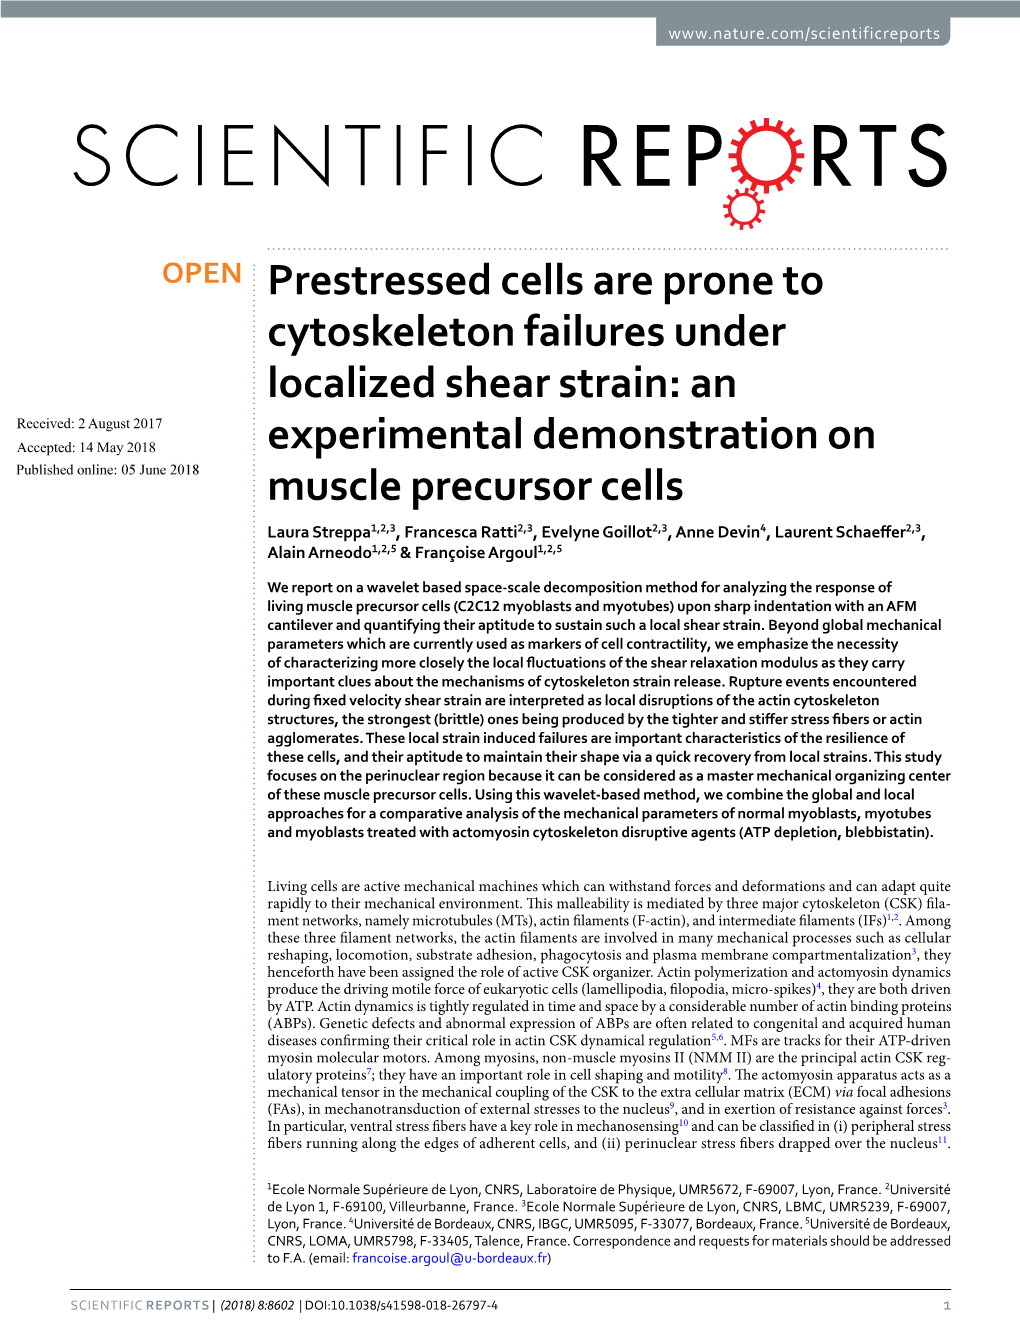 Prestressed Cells Are Prone to Cytoskeleton Failures Under